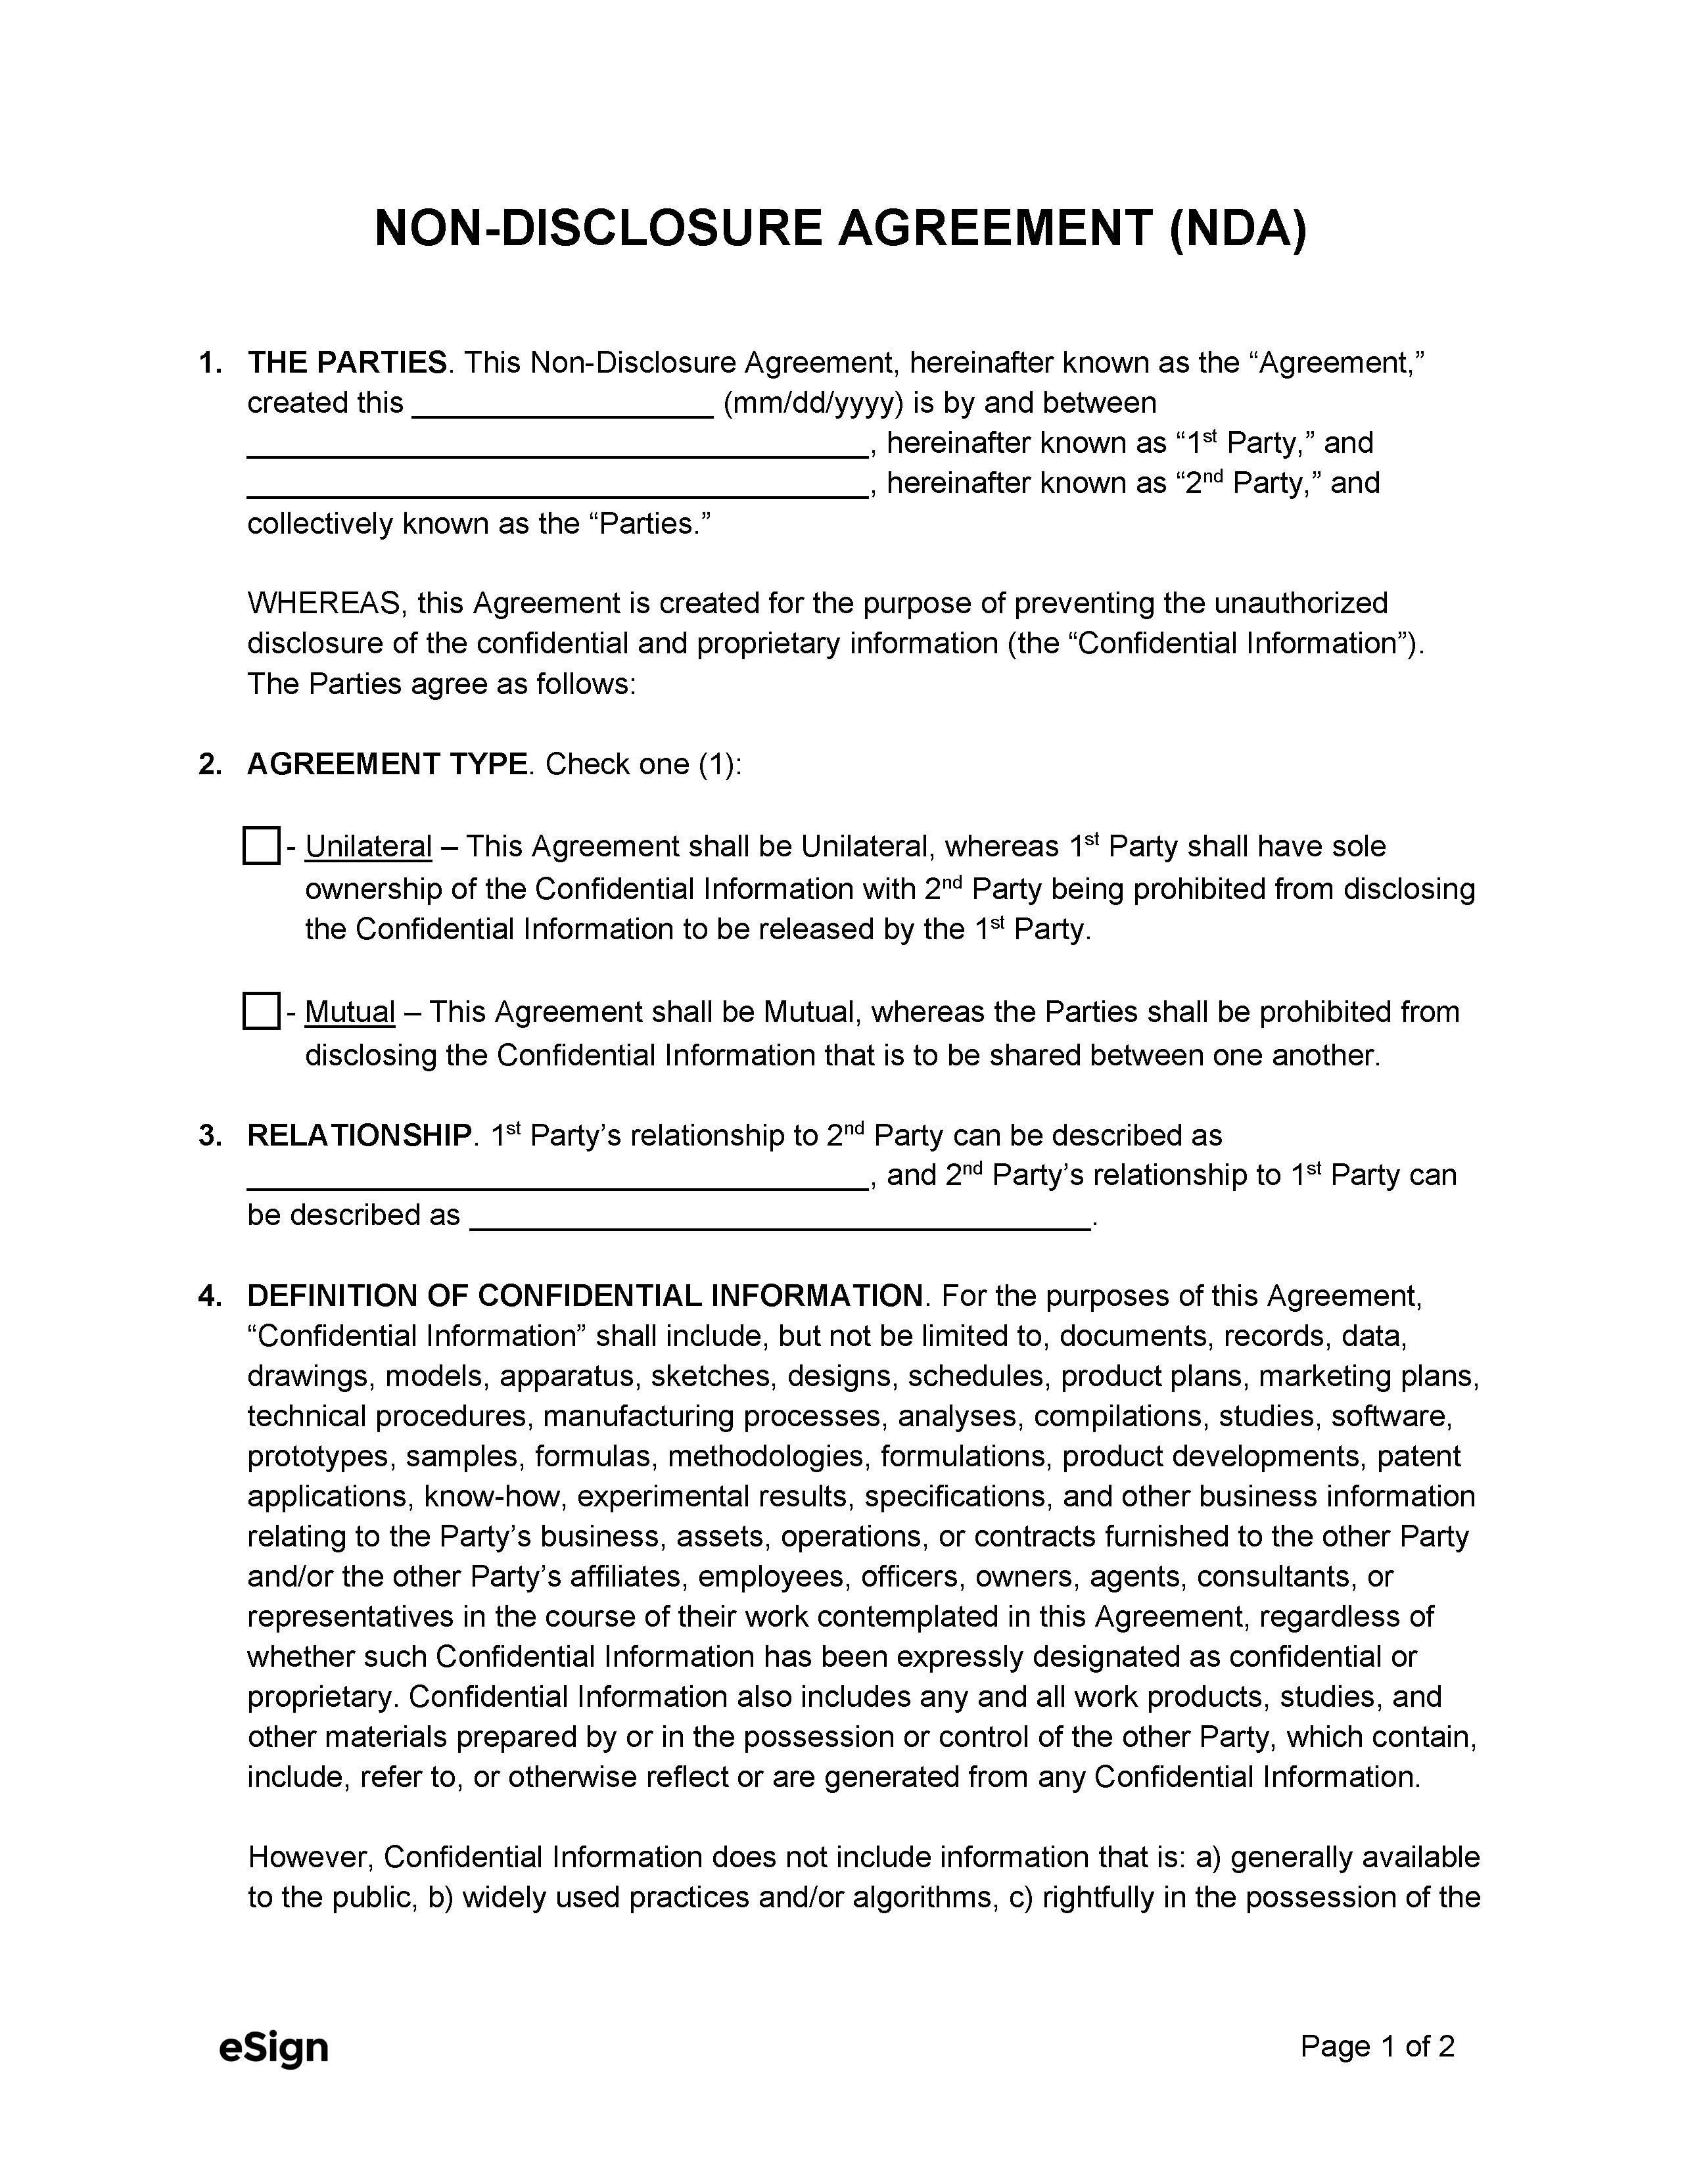 free-confidentiality-agreement-template